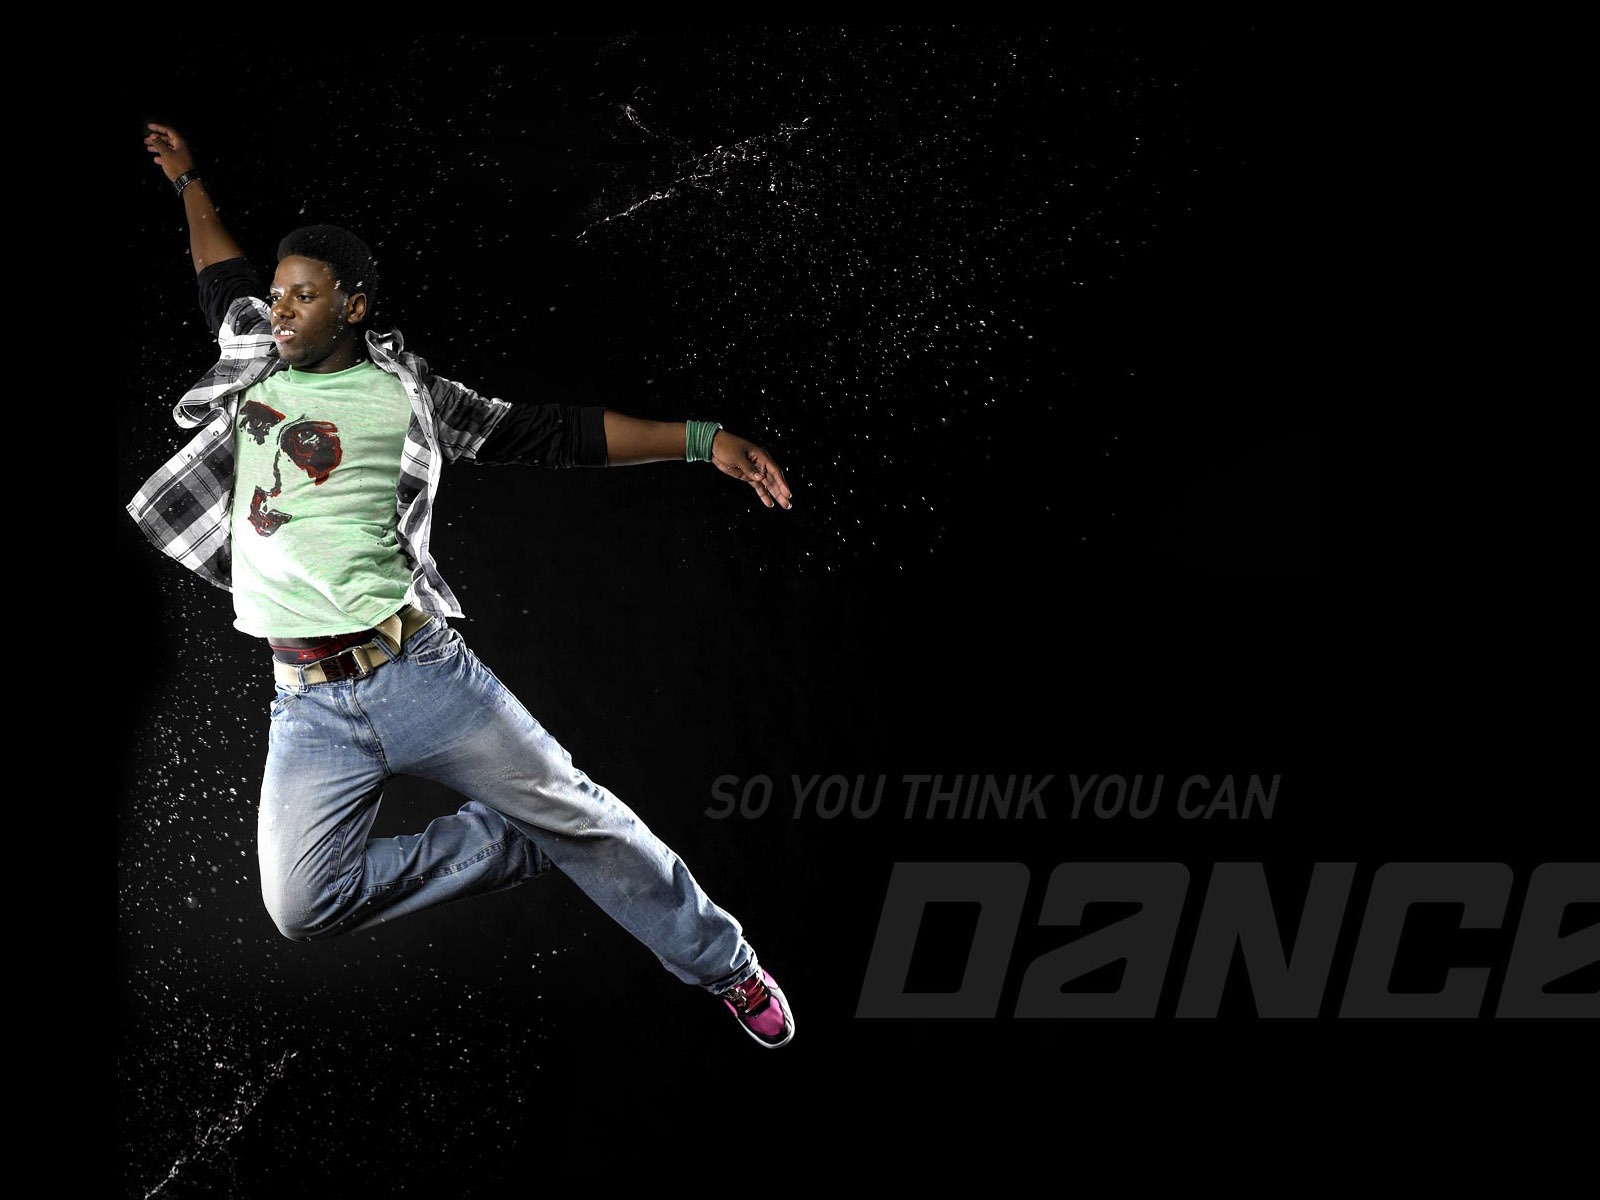 So You Think You Can Dance wallpaper (1) #18 - 1600x1200